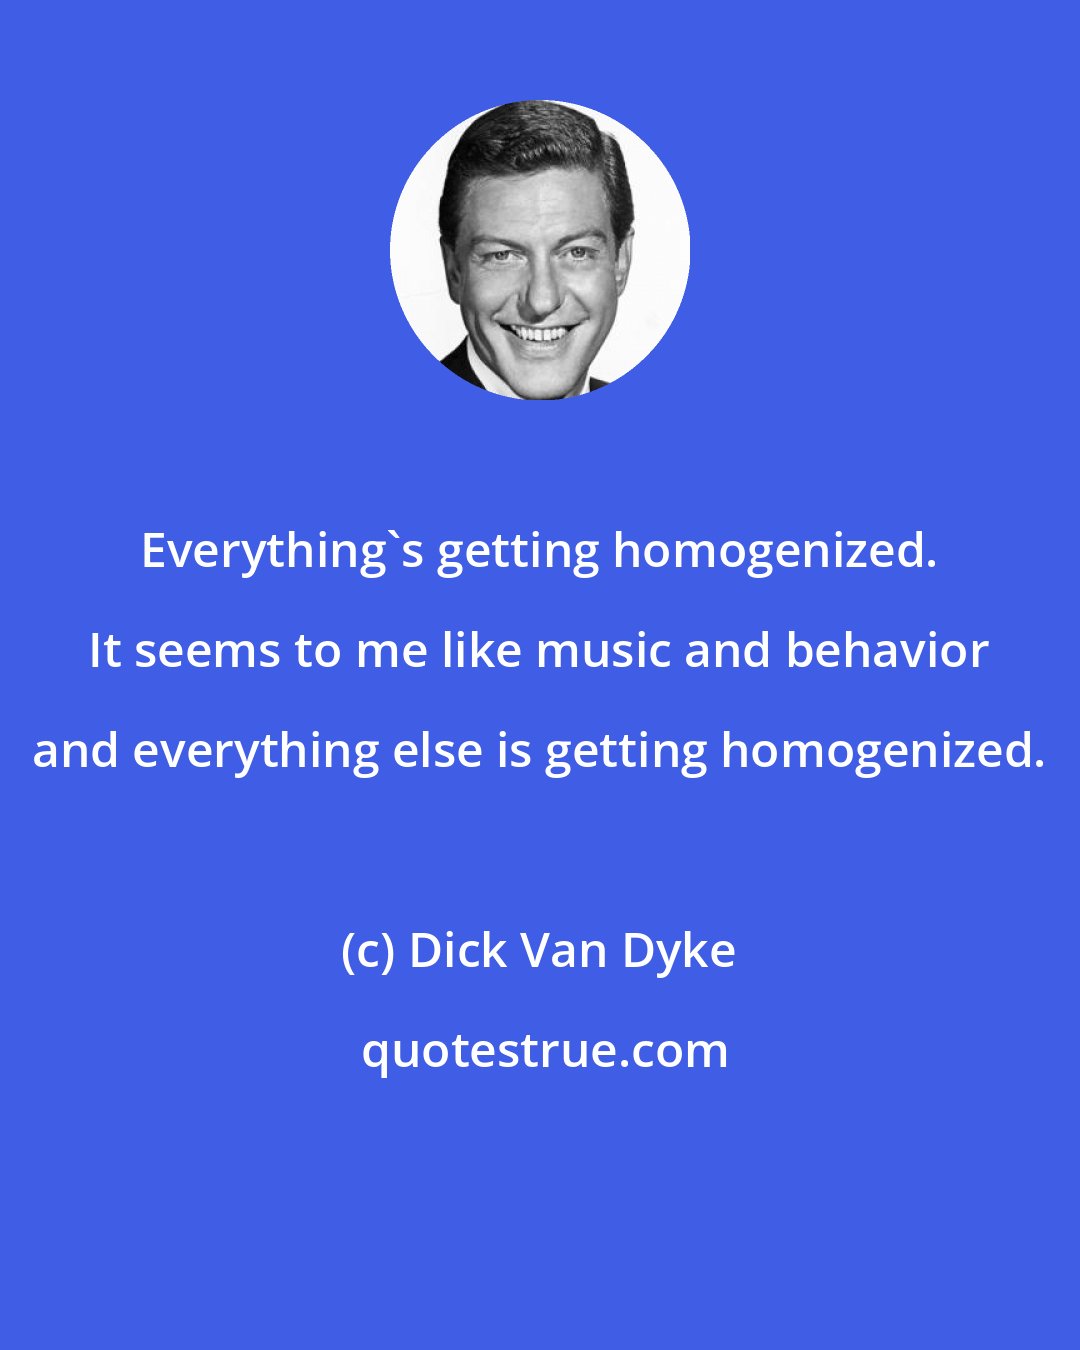 Dick Van Dyke: Everything's getting homogenized. It seems to me like music and behavior and everything else is getting homogenized.